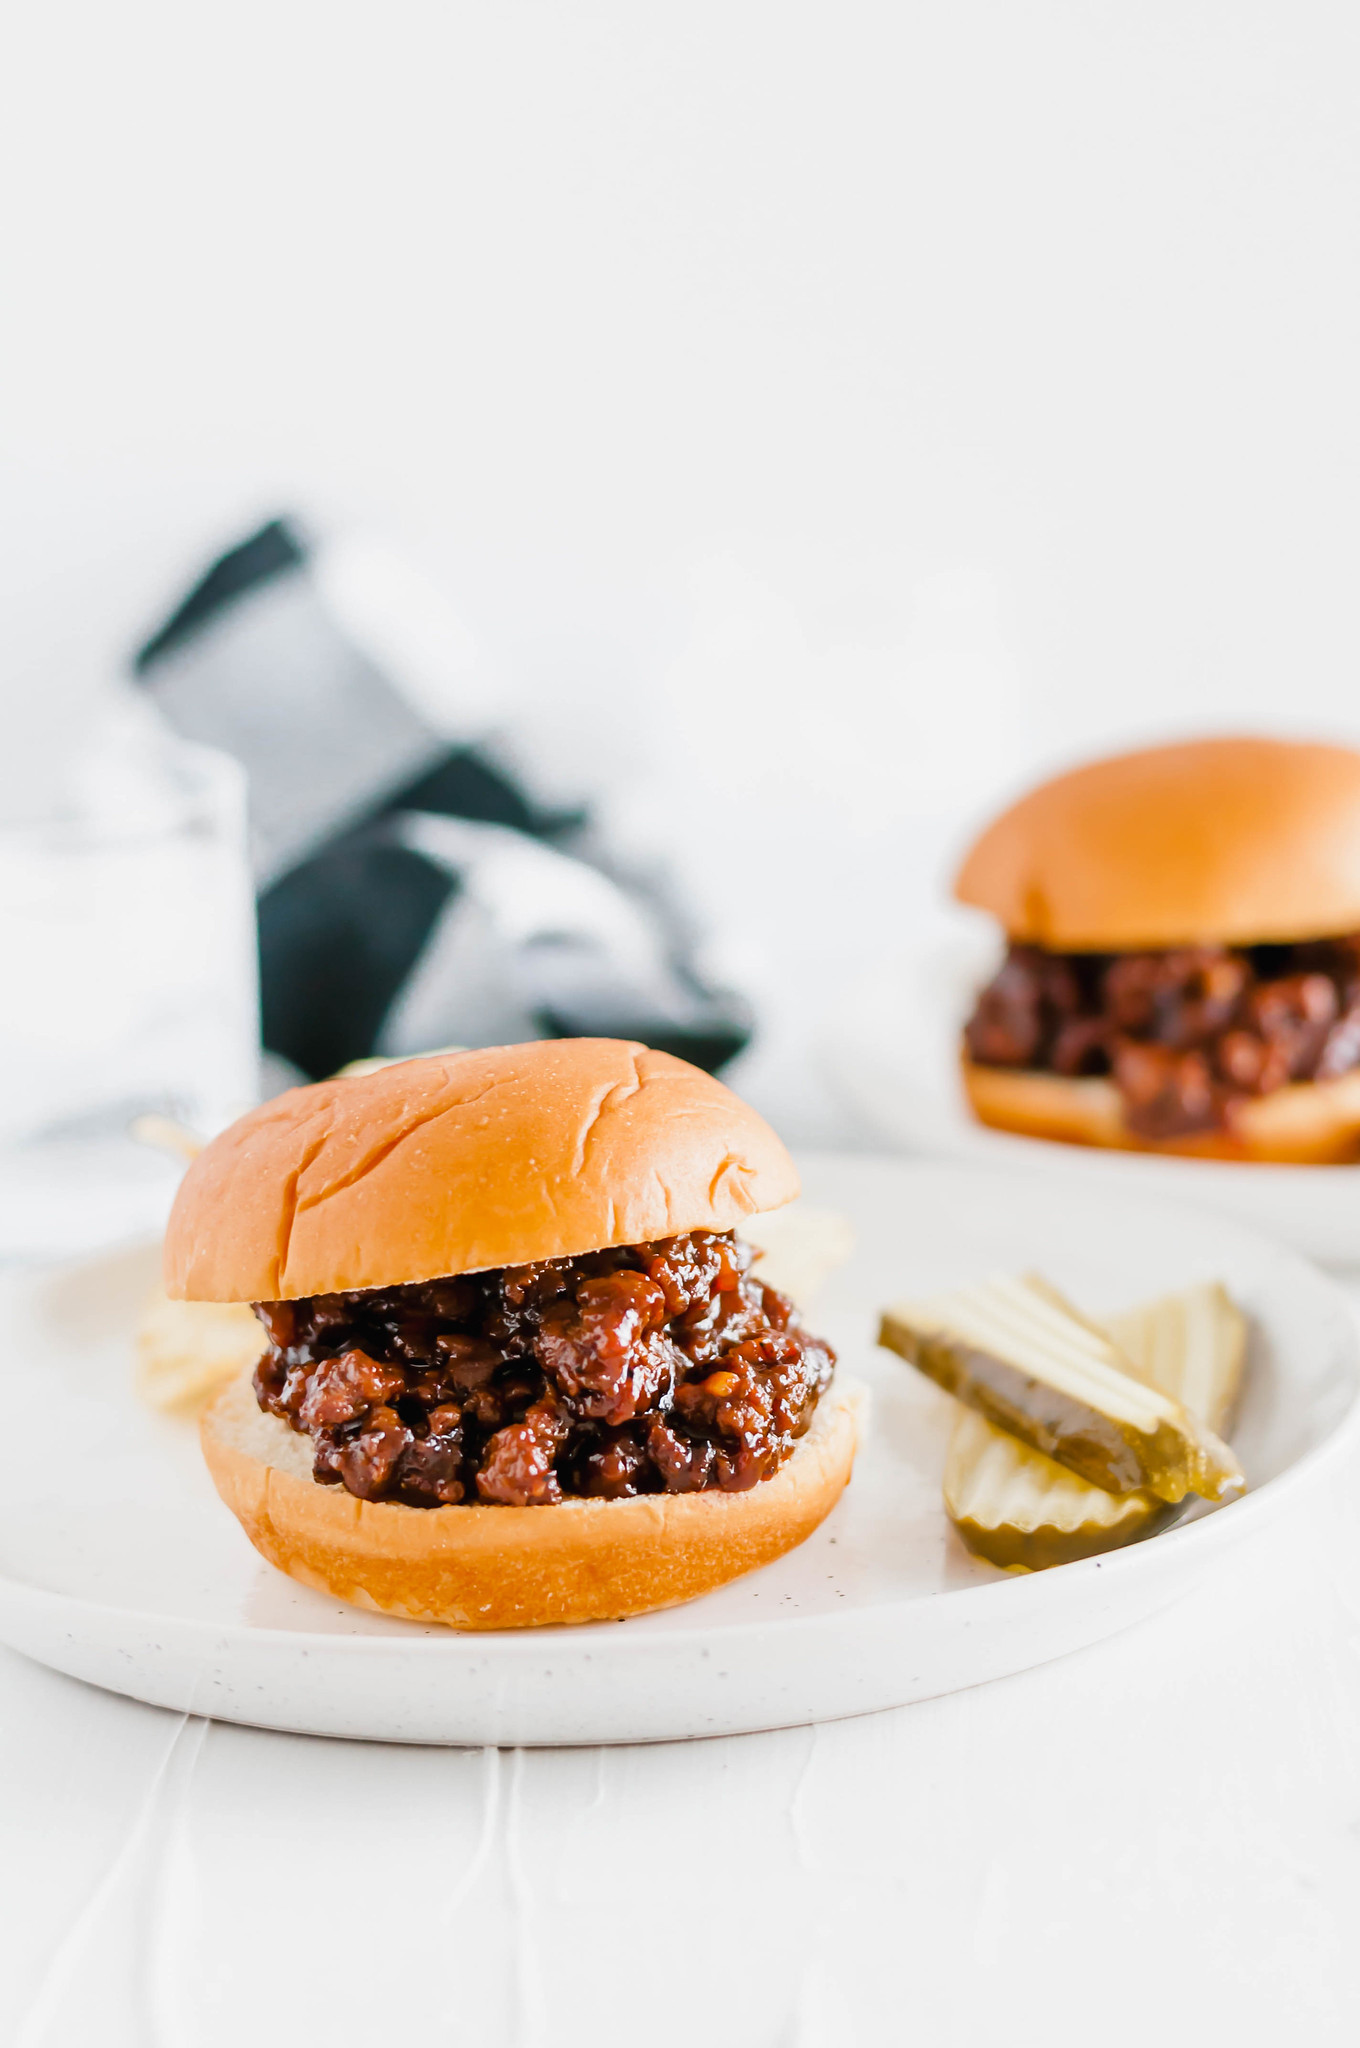 Sweet Chili BBQ Sloppy Joes are the perfect easy dinner any night of the week. They are packed full of flavor and done in 30 minutes.